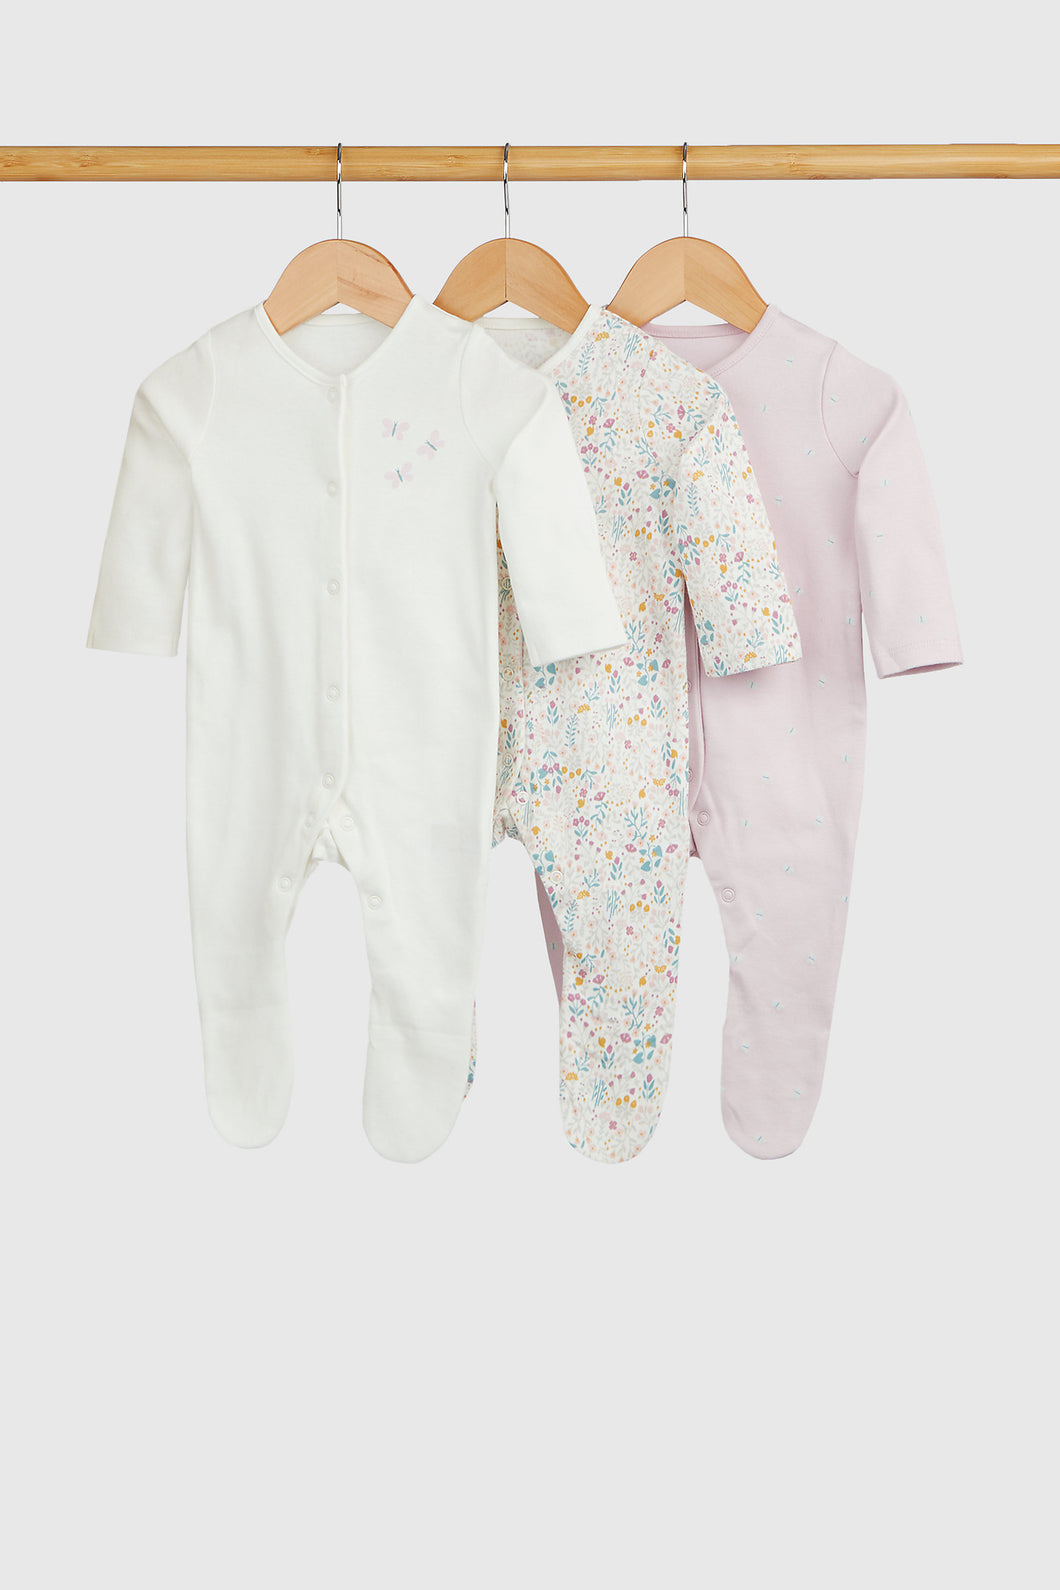 Mothercare Wild Flower Baby Sleepsuits - 3 Pack